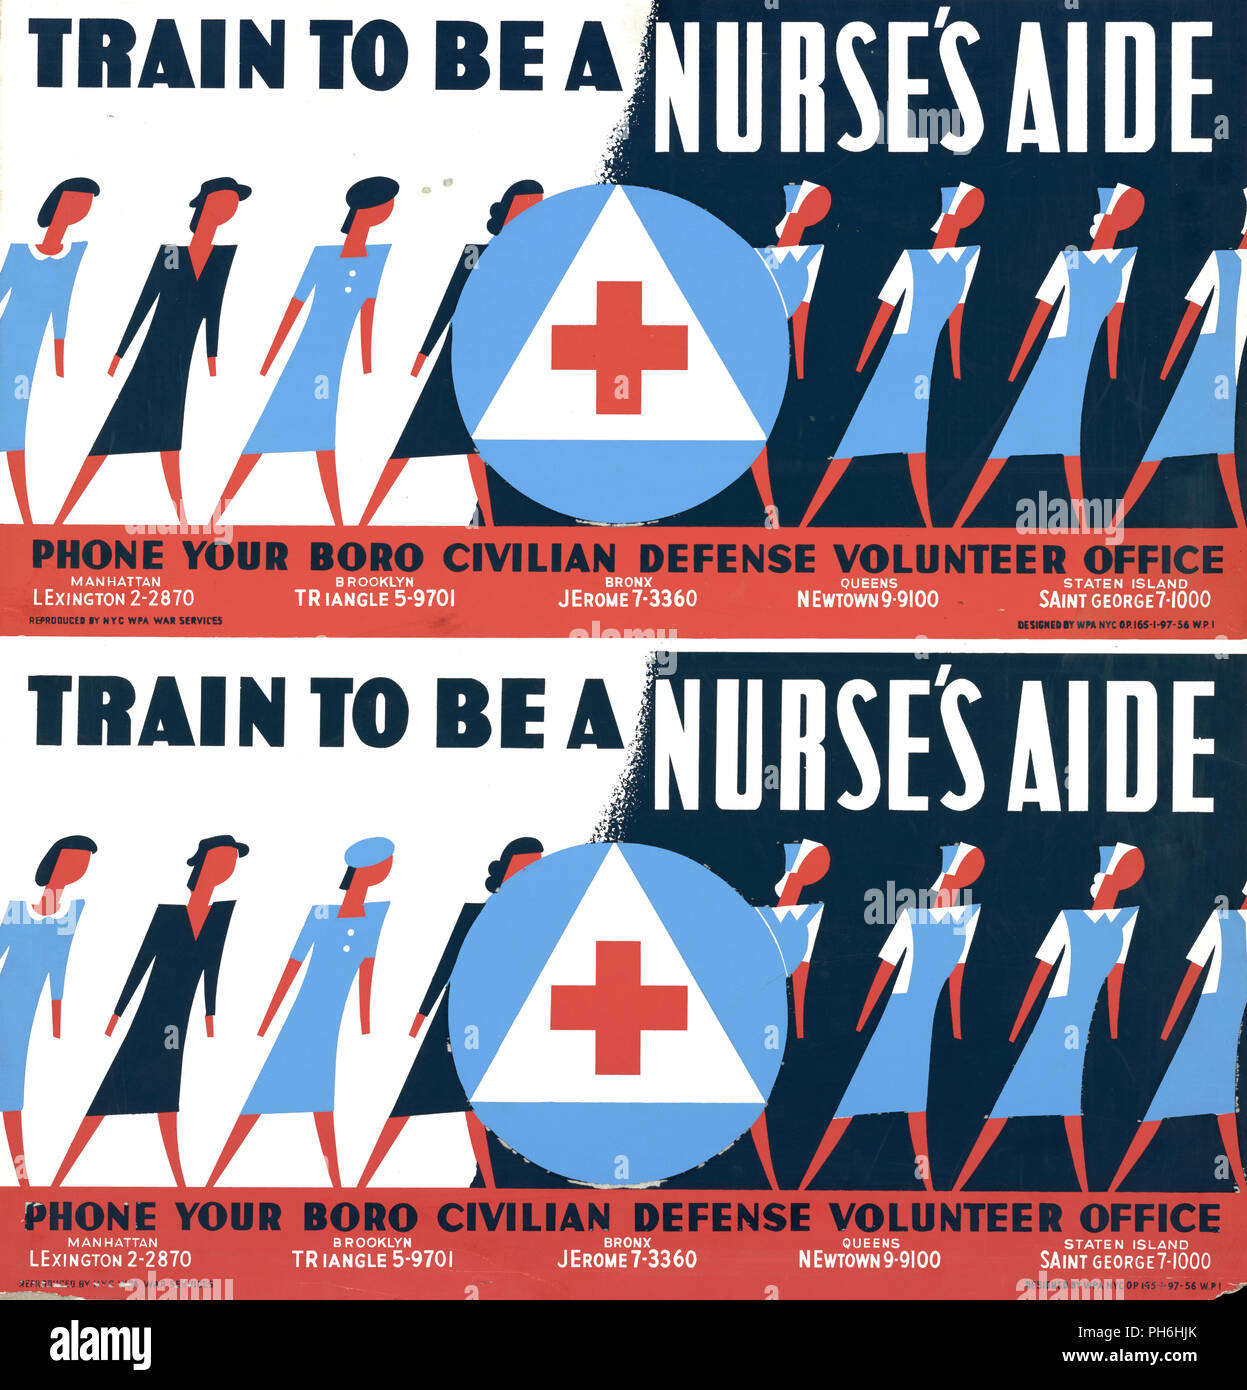 Poster encouraging women to become nurses' aides for the Civilian Defense Volunteer Office, showing women in civilian dress and nurse's uniforms. Stock Photo